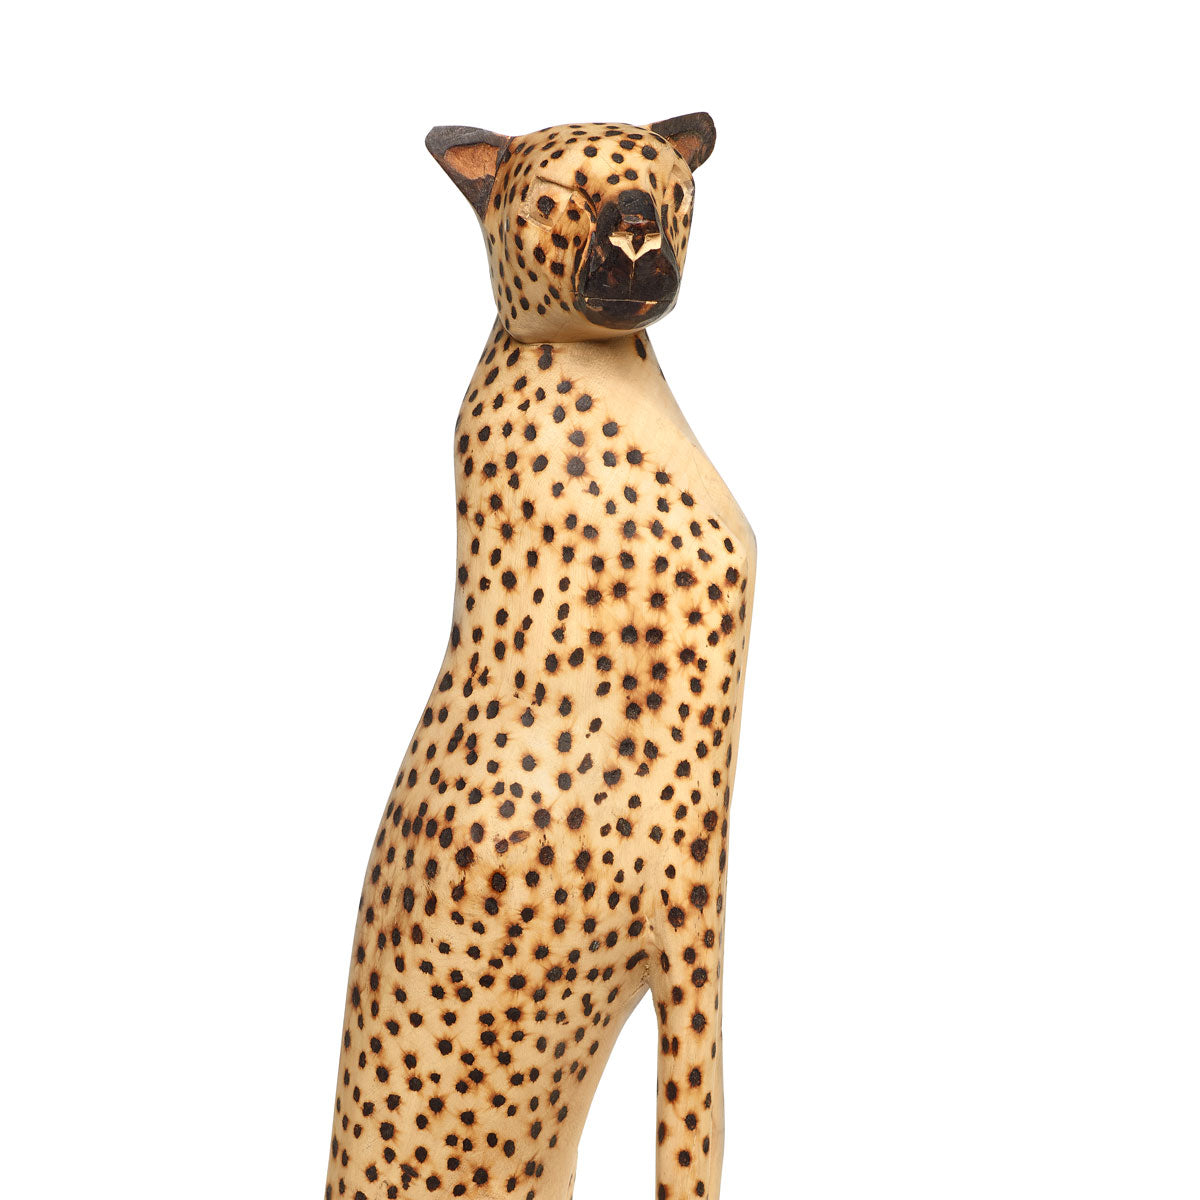 Large Hand Carved Cheetah Sitting Sculpture